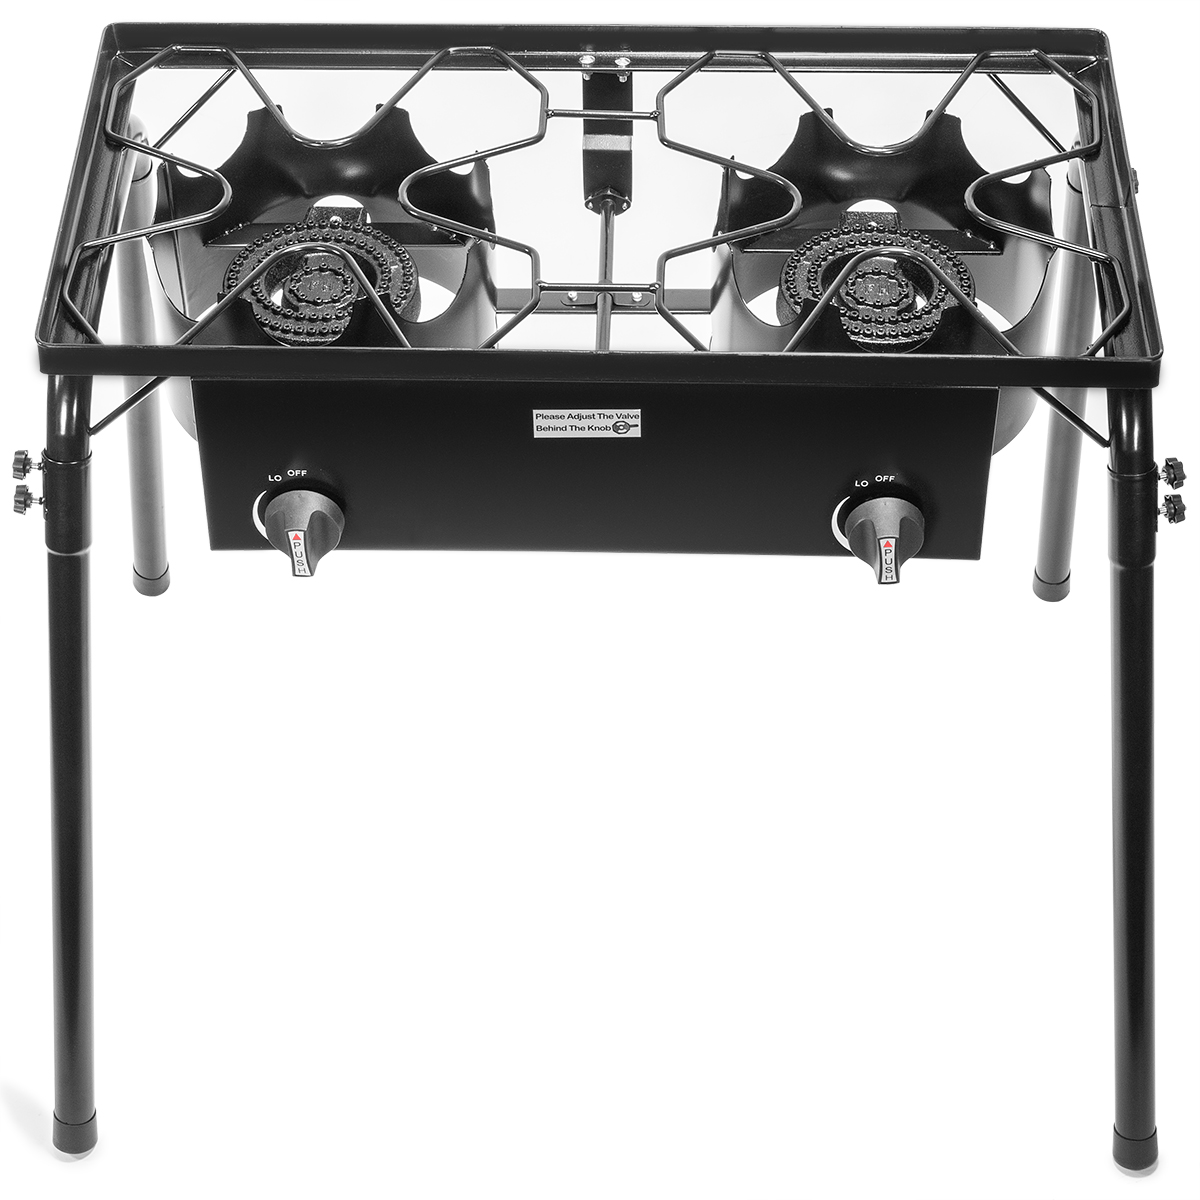 Barton Outdoor 70000 BTU 2-Burner Stove 95512-1 High-Pressure Grill Cooker BBQ Camp Gas Stove Stand - image 1 of 7